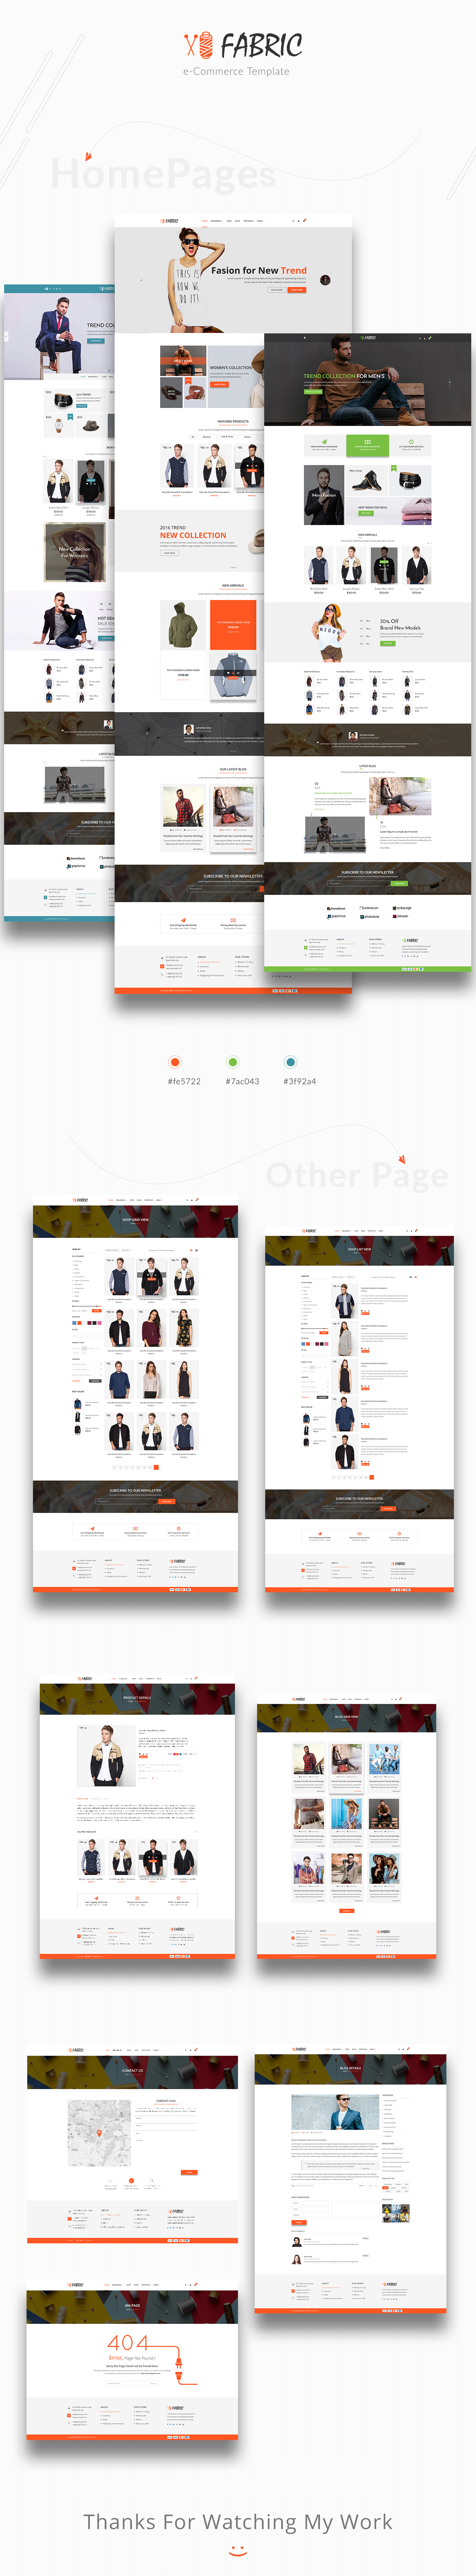 Fabric - Bootstrap eCommerce Website Template - 1